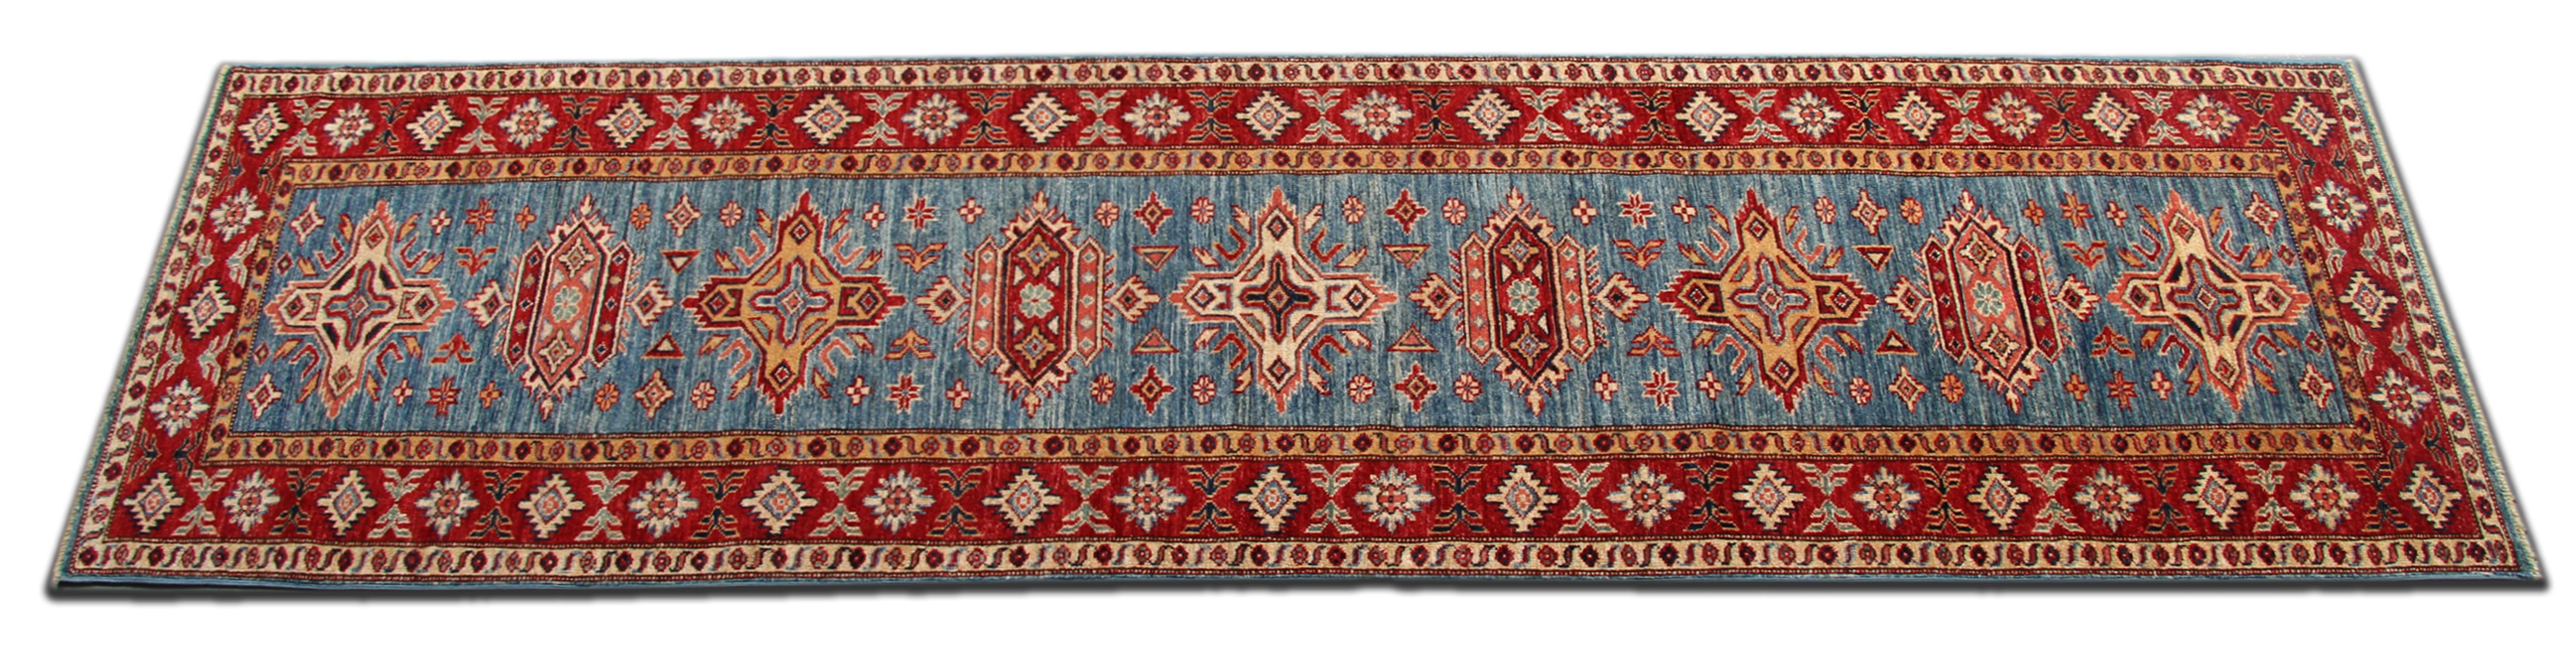 This handmade carpet runner's new traditional handwoven Kazak rug comes in a striking colour combination. This Blue rug has cream, red and caramel accent colours woven through both the centre and border. The pattern depicted on this hand-woven